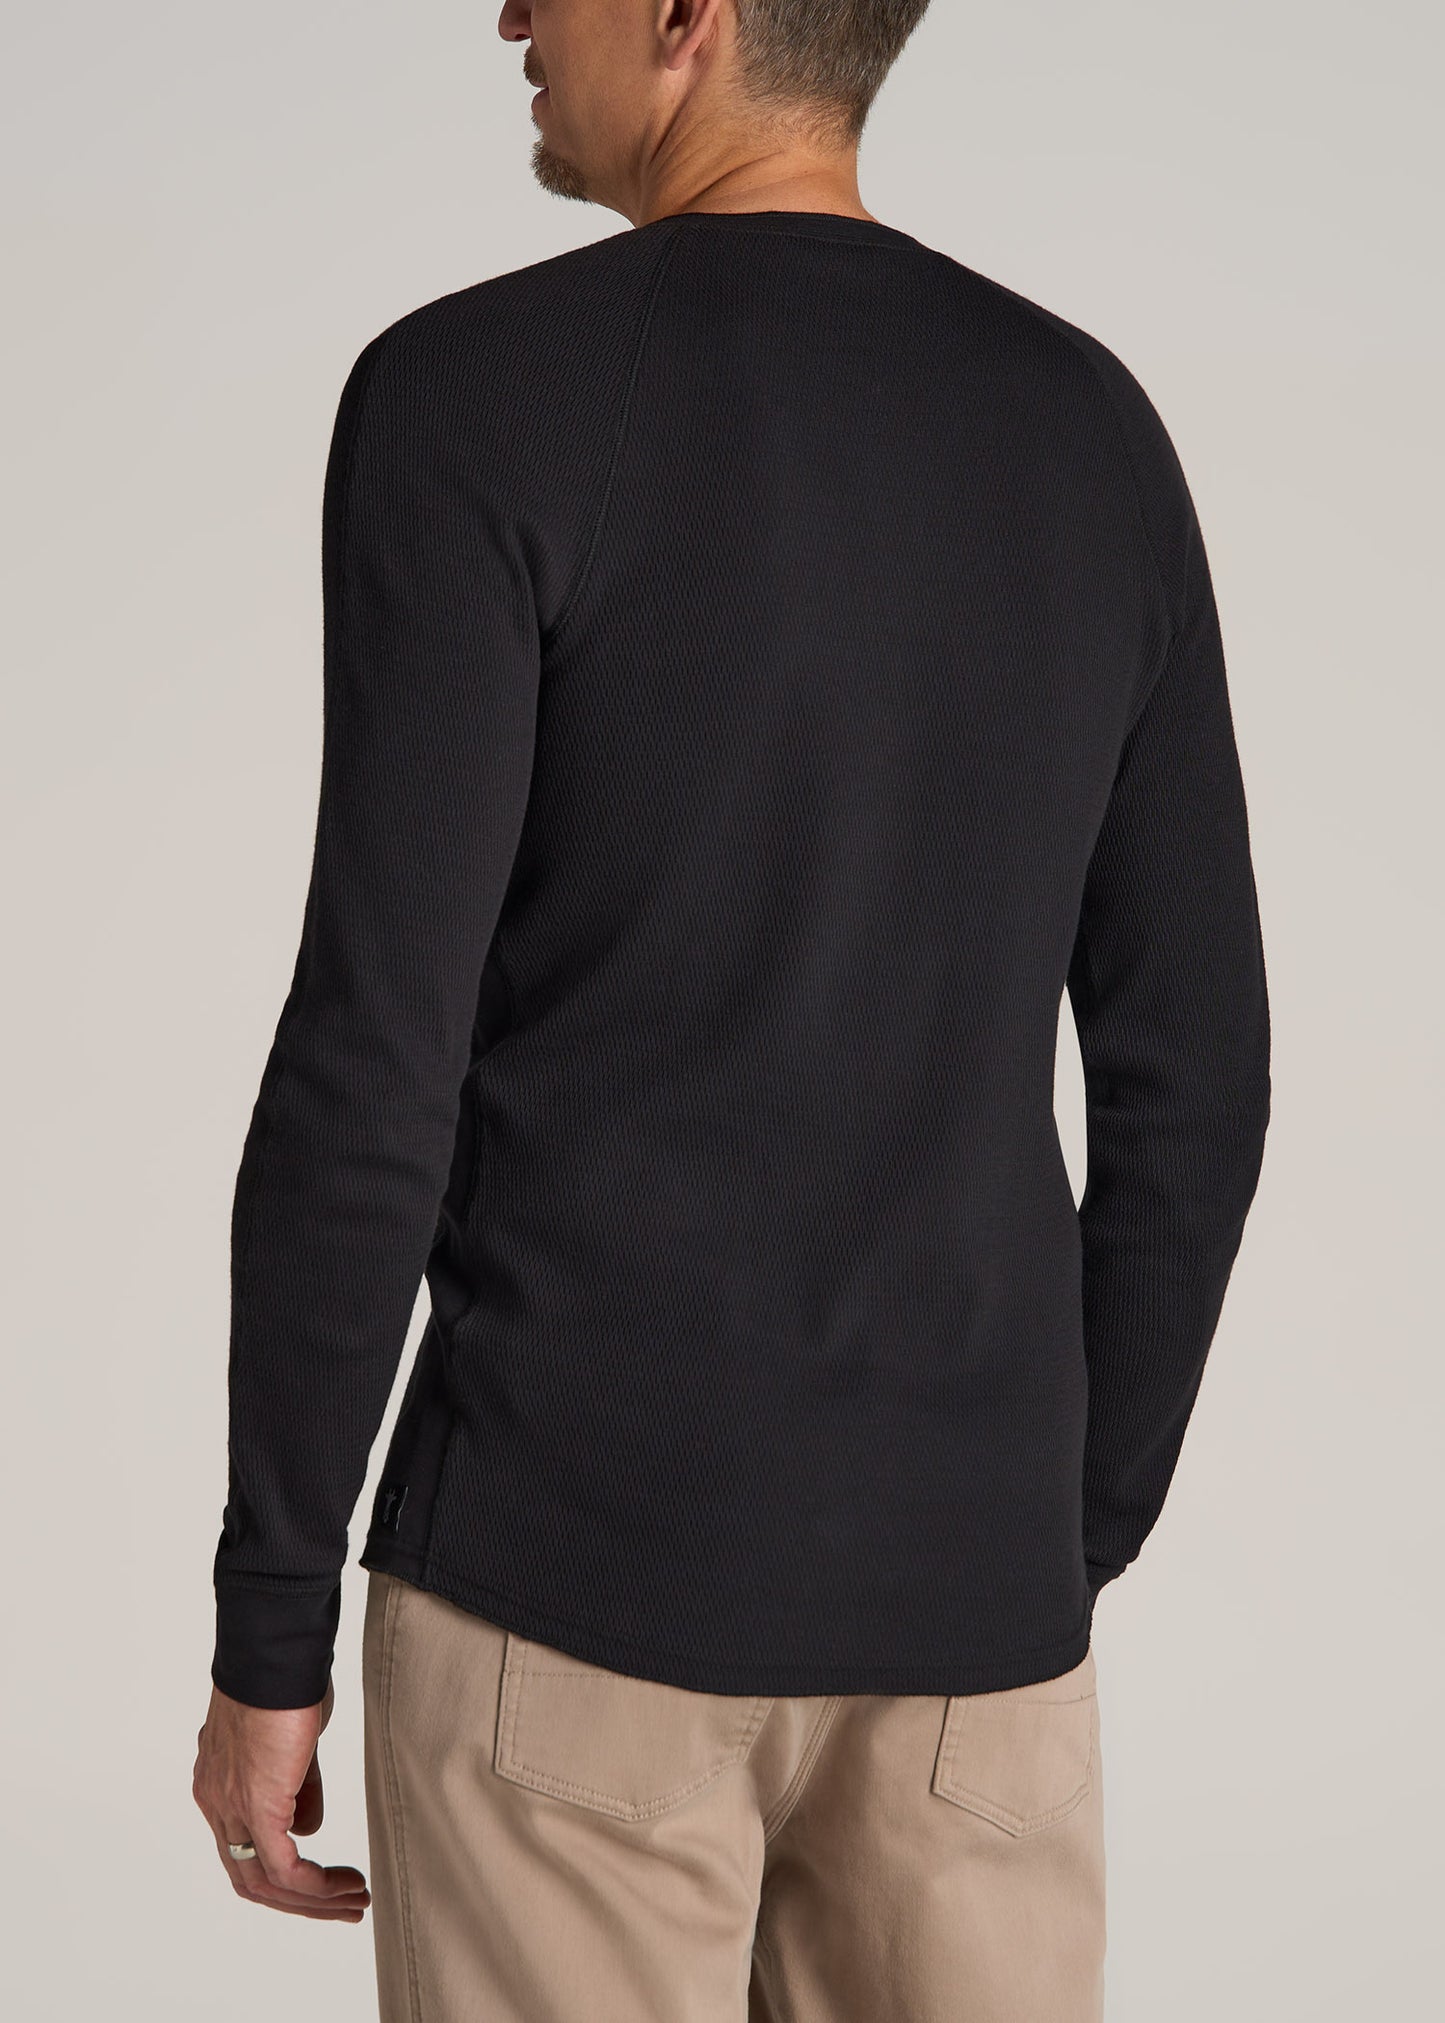 American-Tall-Men-Double-Honeycomb-Thermal-LS-Henley-Black-back